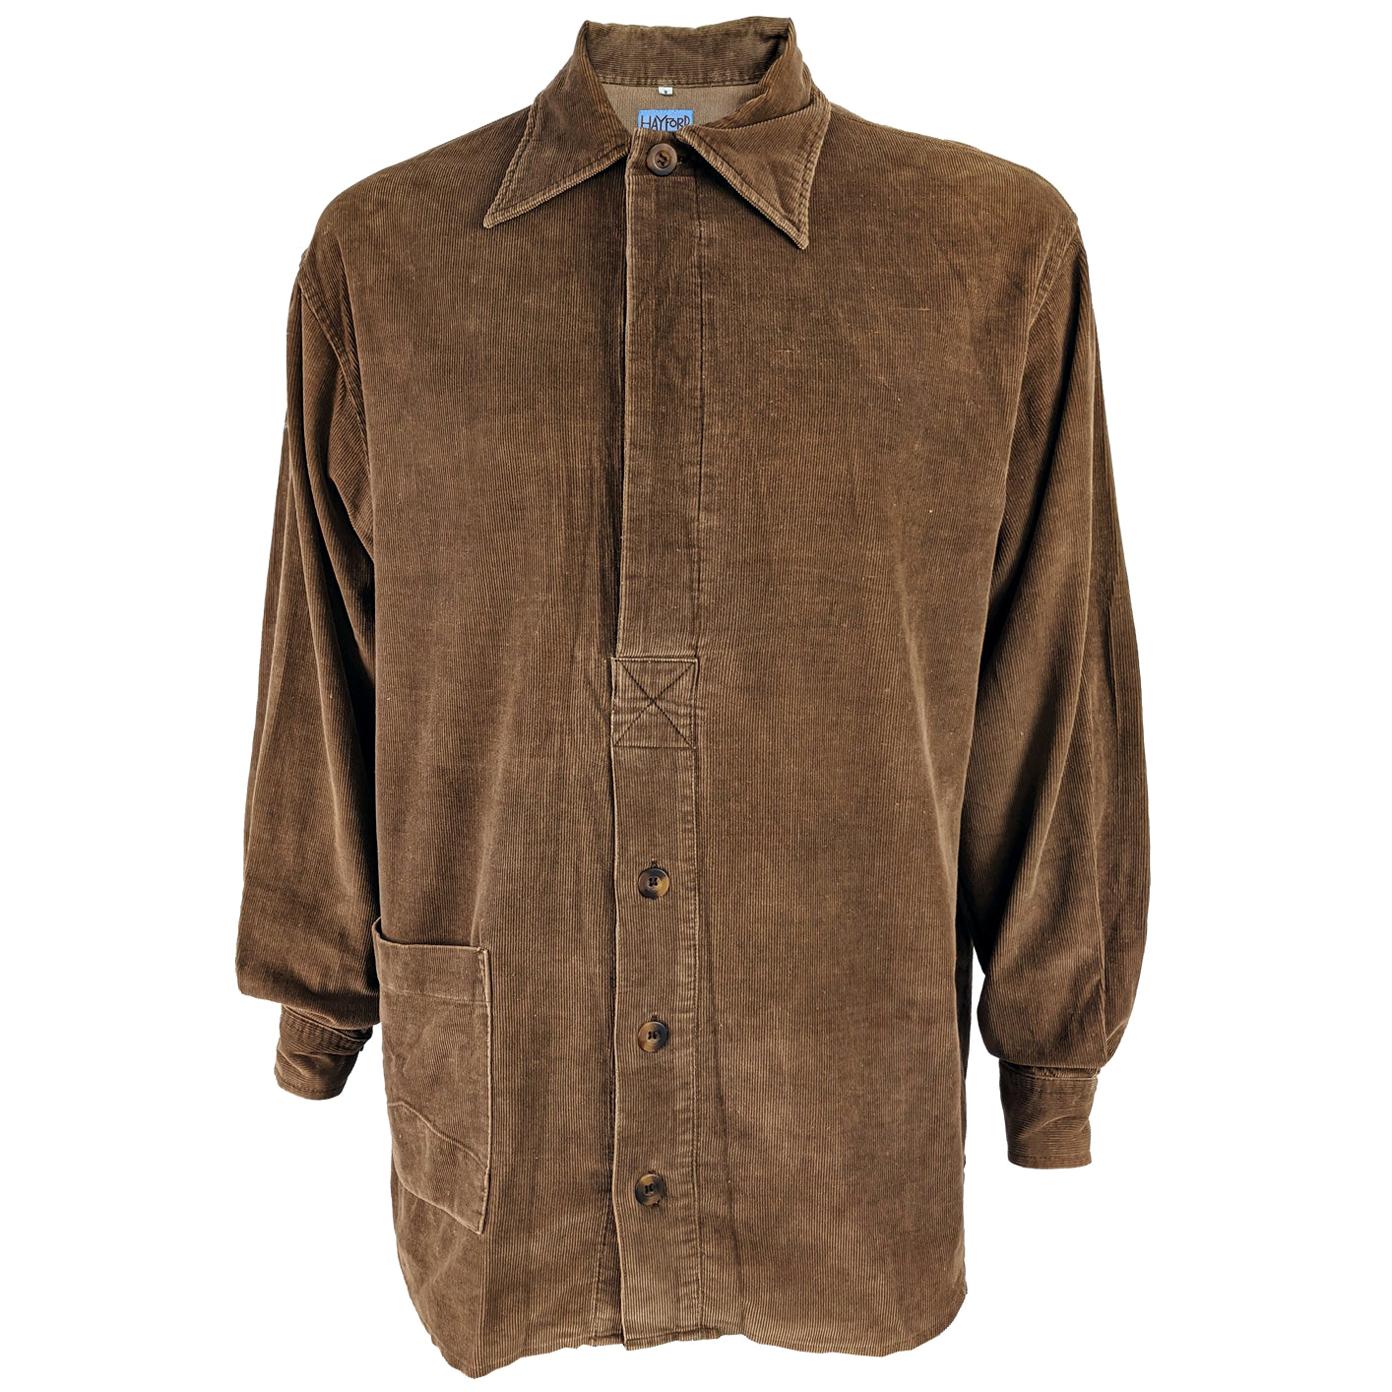 Joe Casely Hayford Vintage Brown Cord Shirt, 1990s For Sale